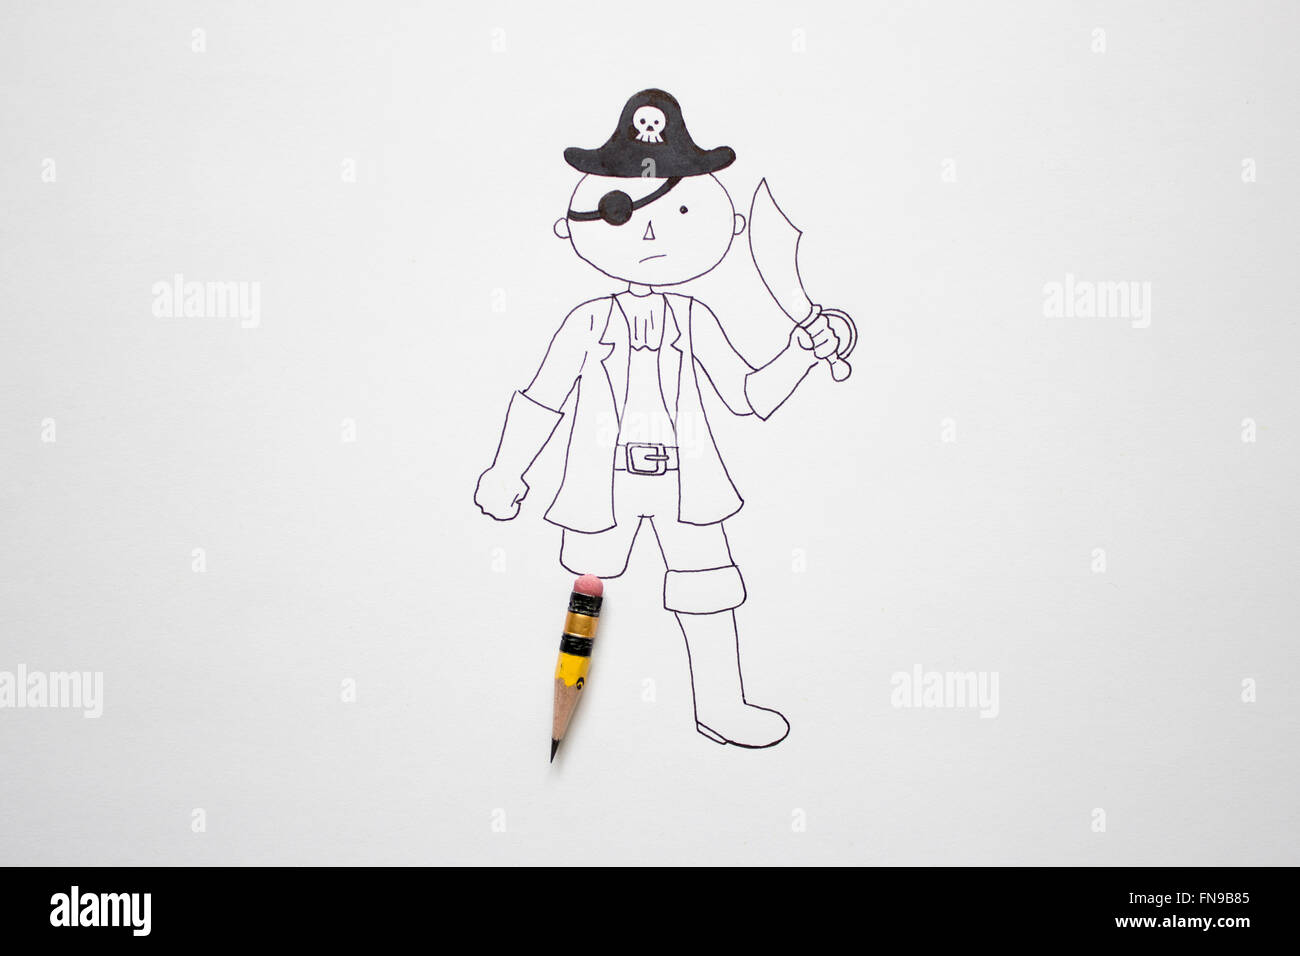 Conceptual drawing of a pirate with peg leg Stock Photo